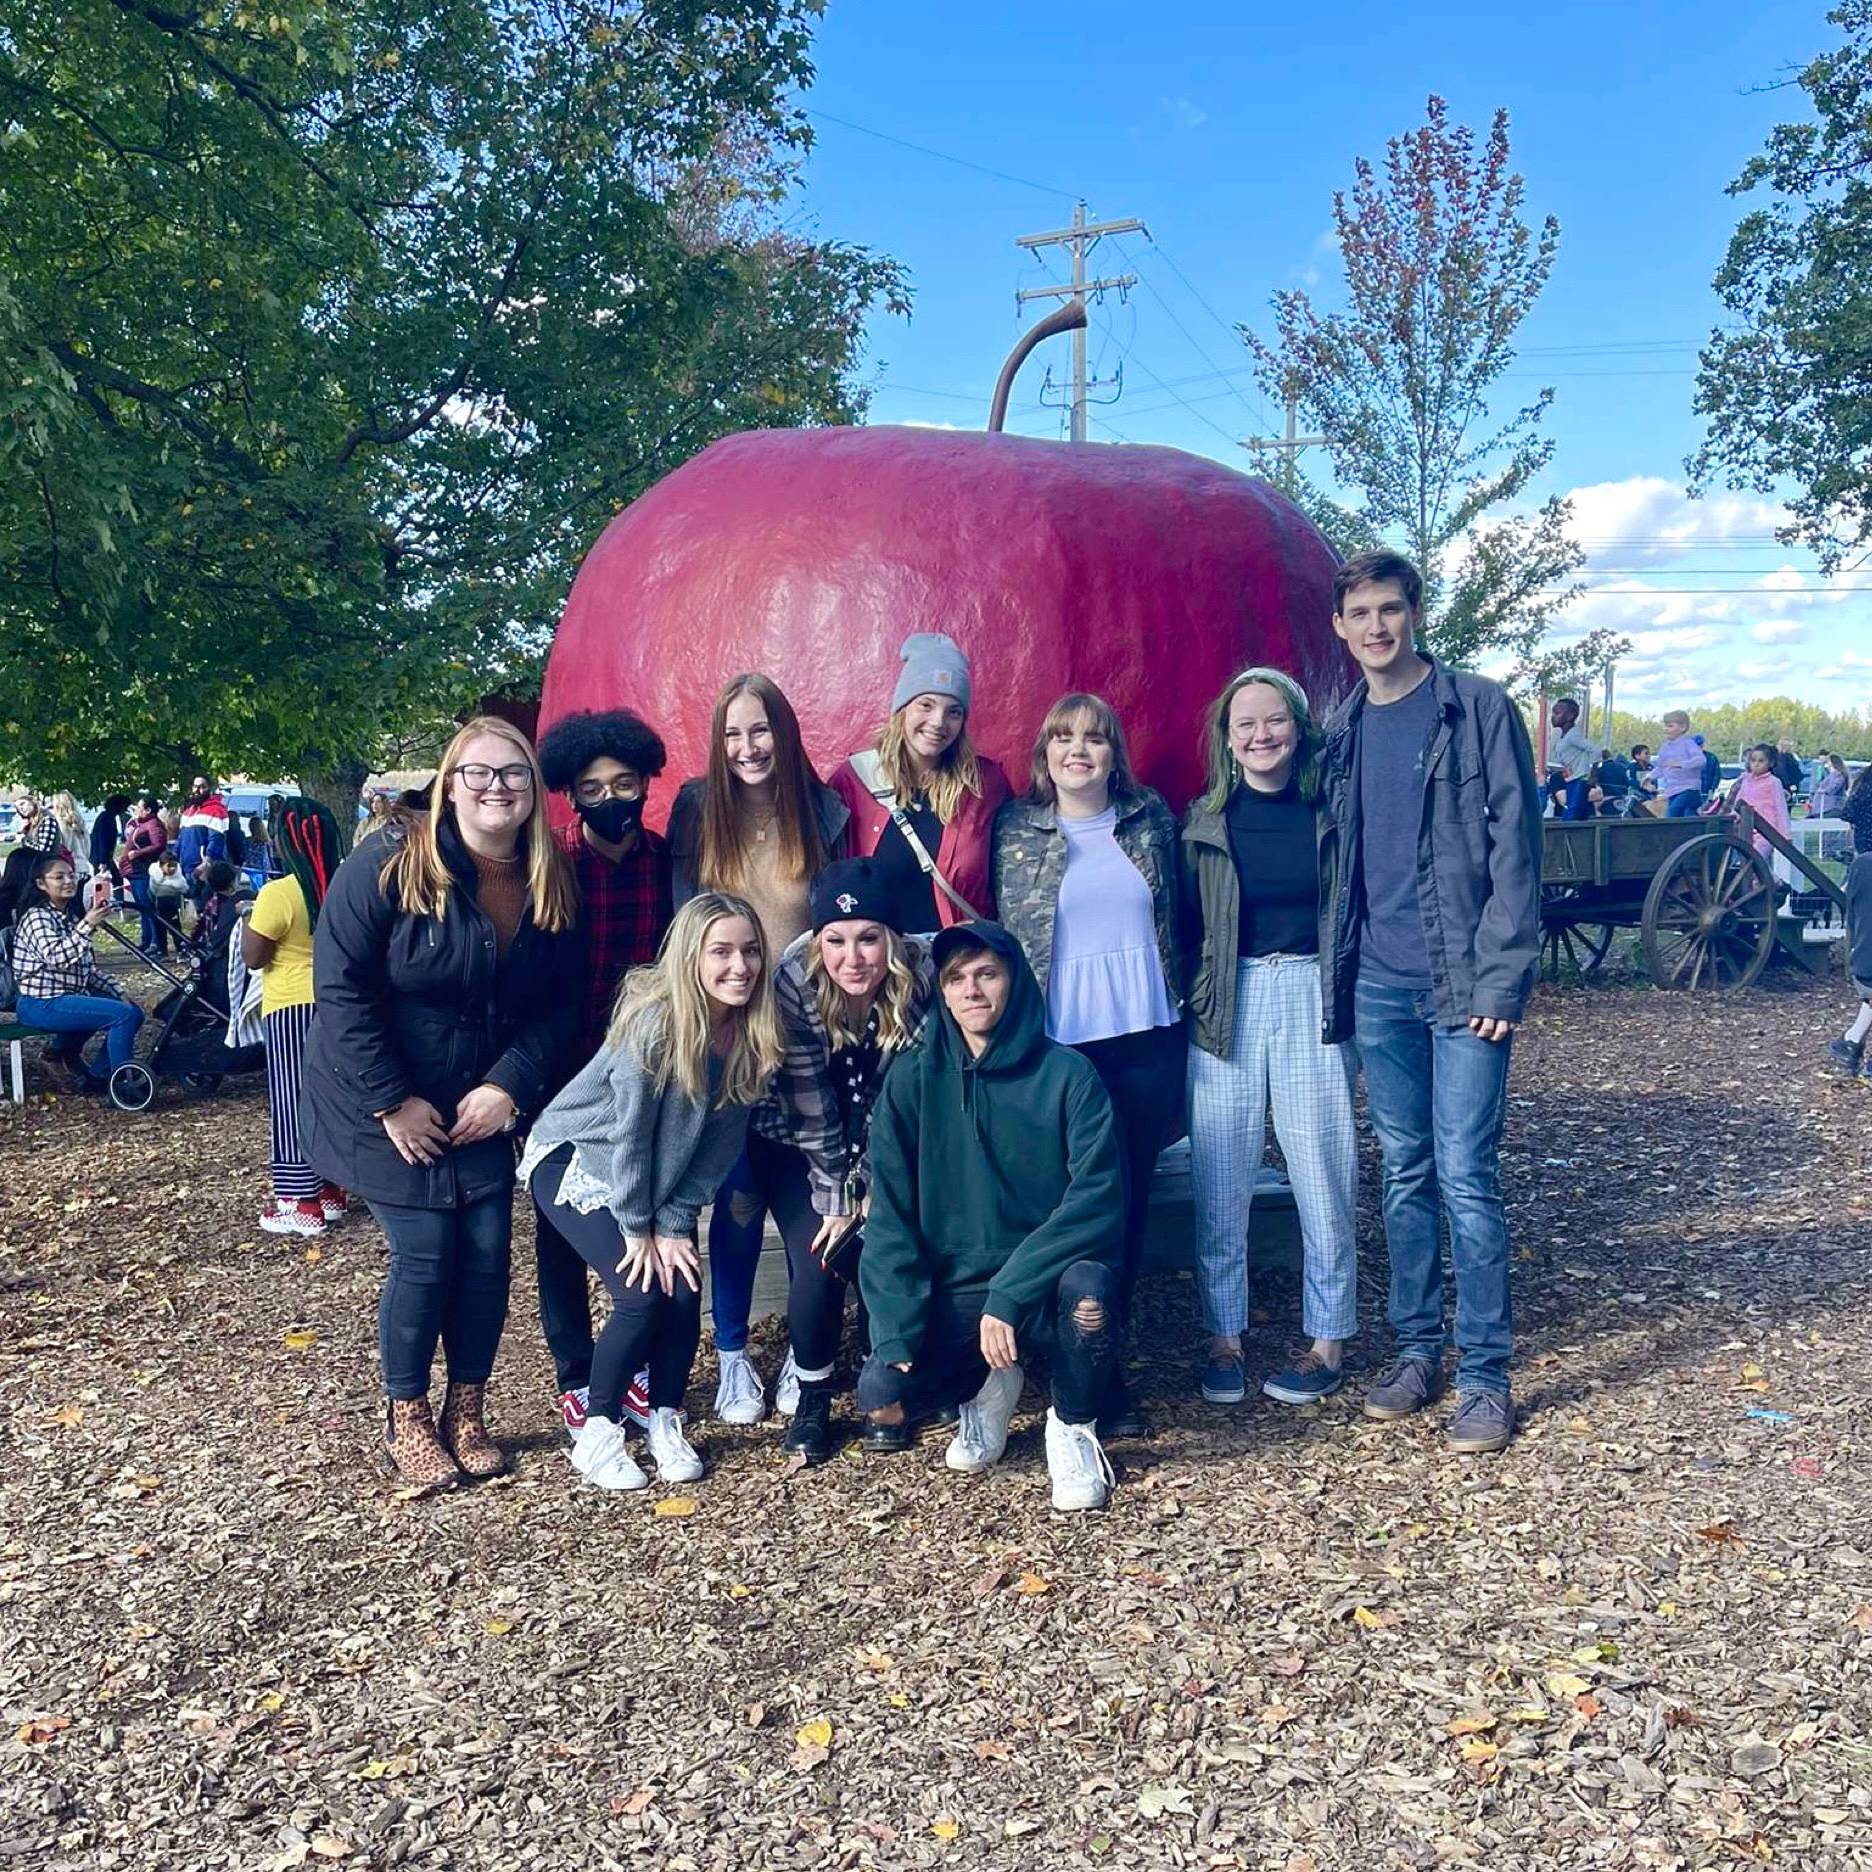 Fall themed bonding at the apple orchard